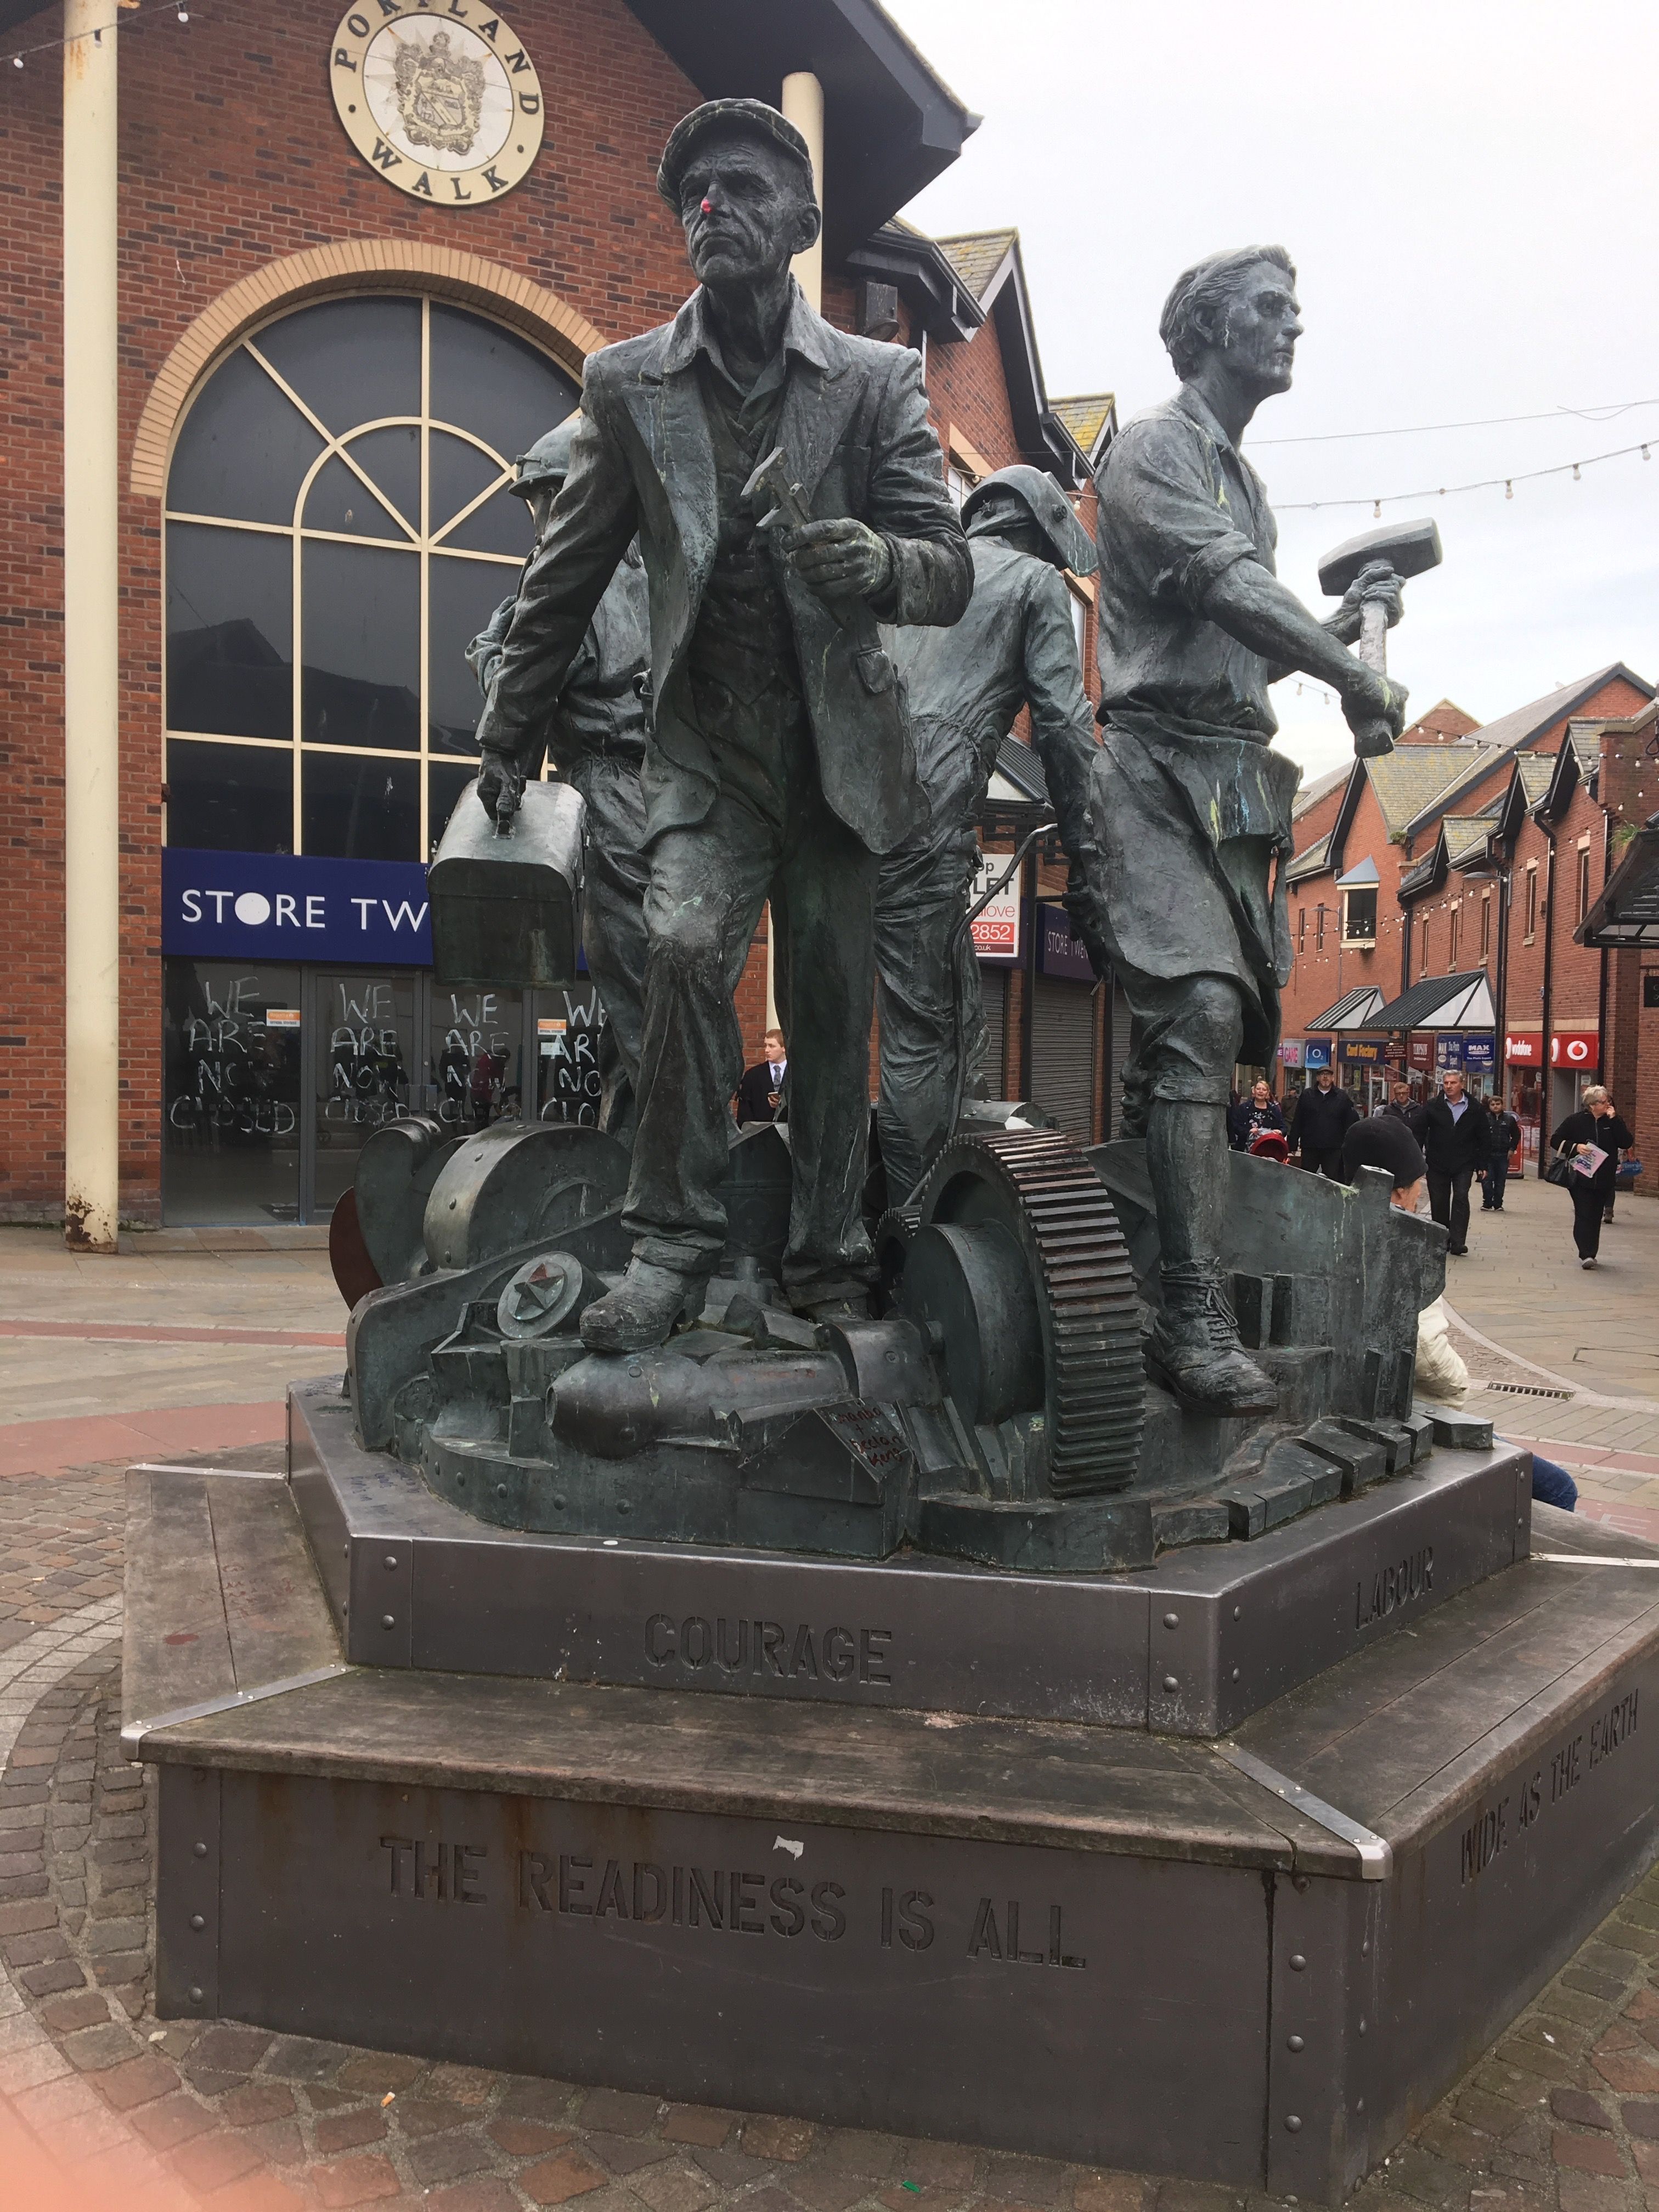 This monument to the heroic workers of the shipyard in Barrow was paid for by BAE Systems. It reads: "COURAGE. THE READINESS IS ALL". Image by Matt Kennard. United Kingdom, 2017.